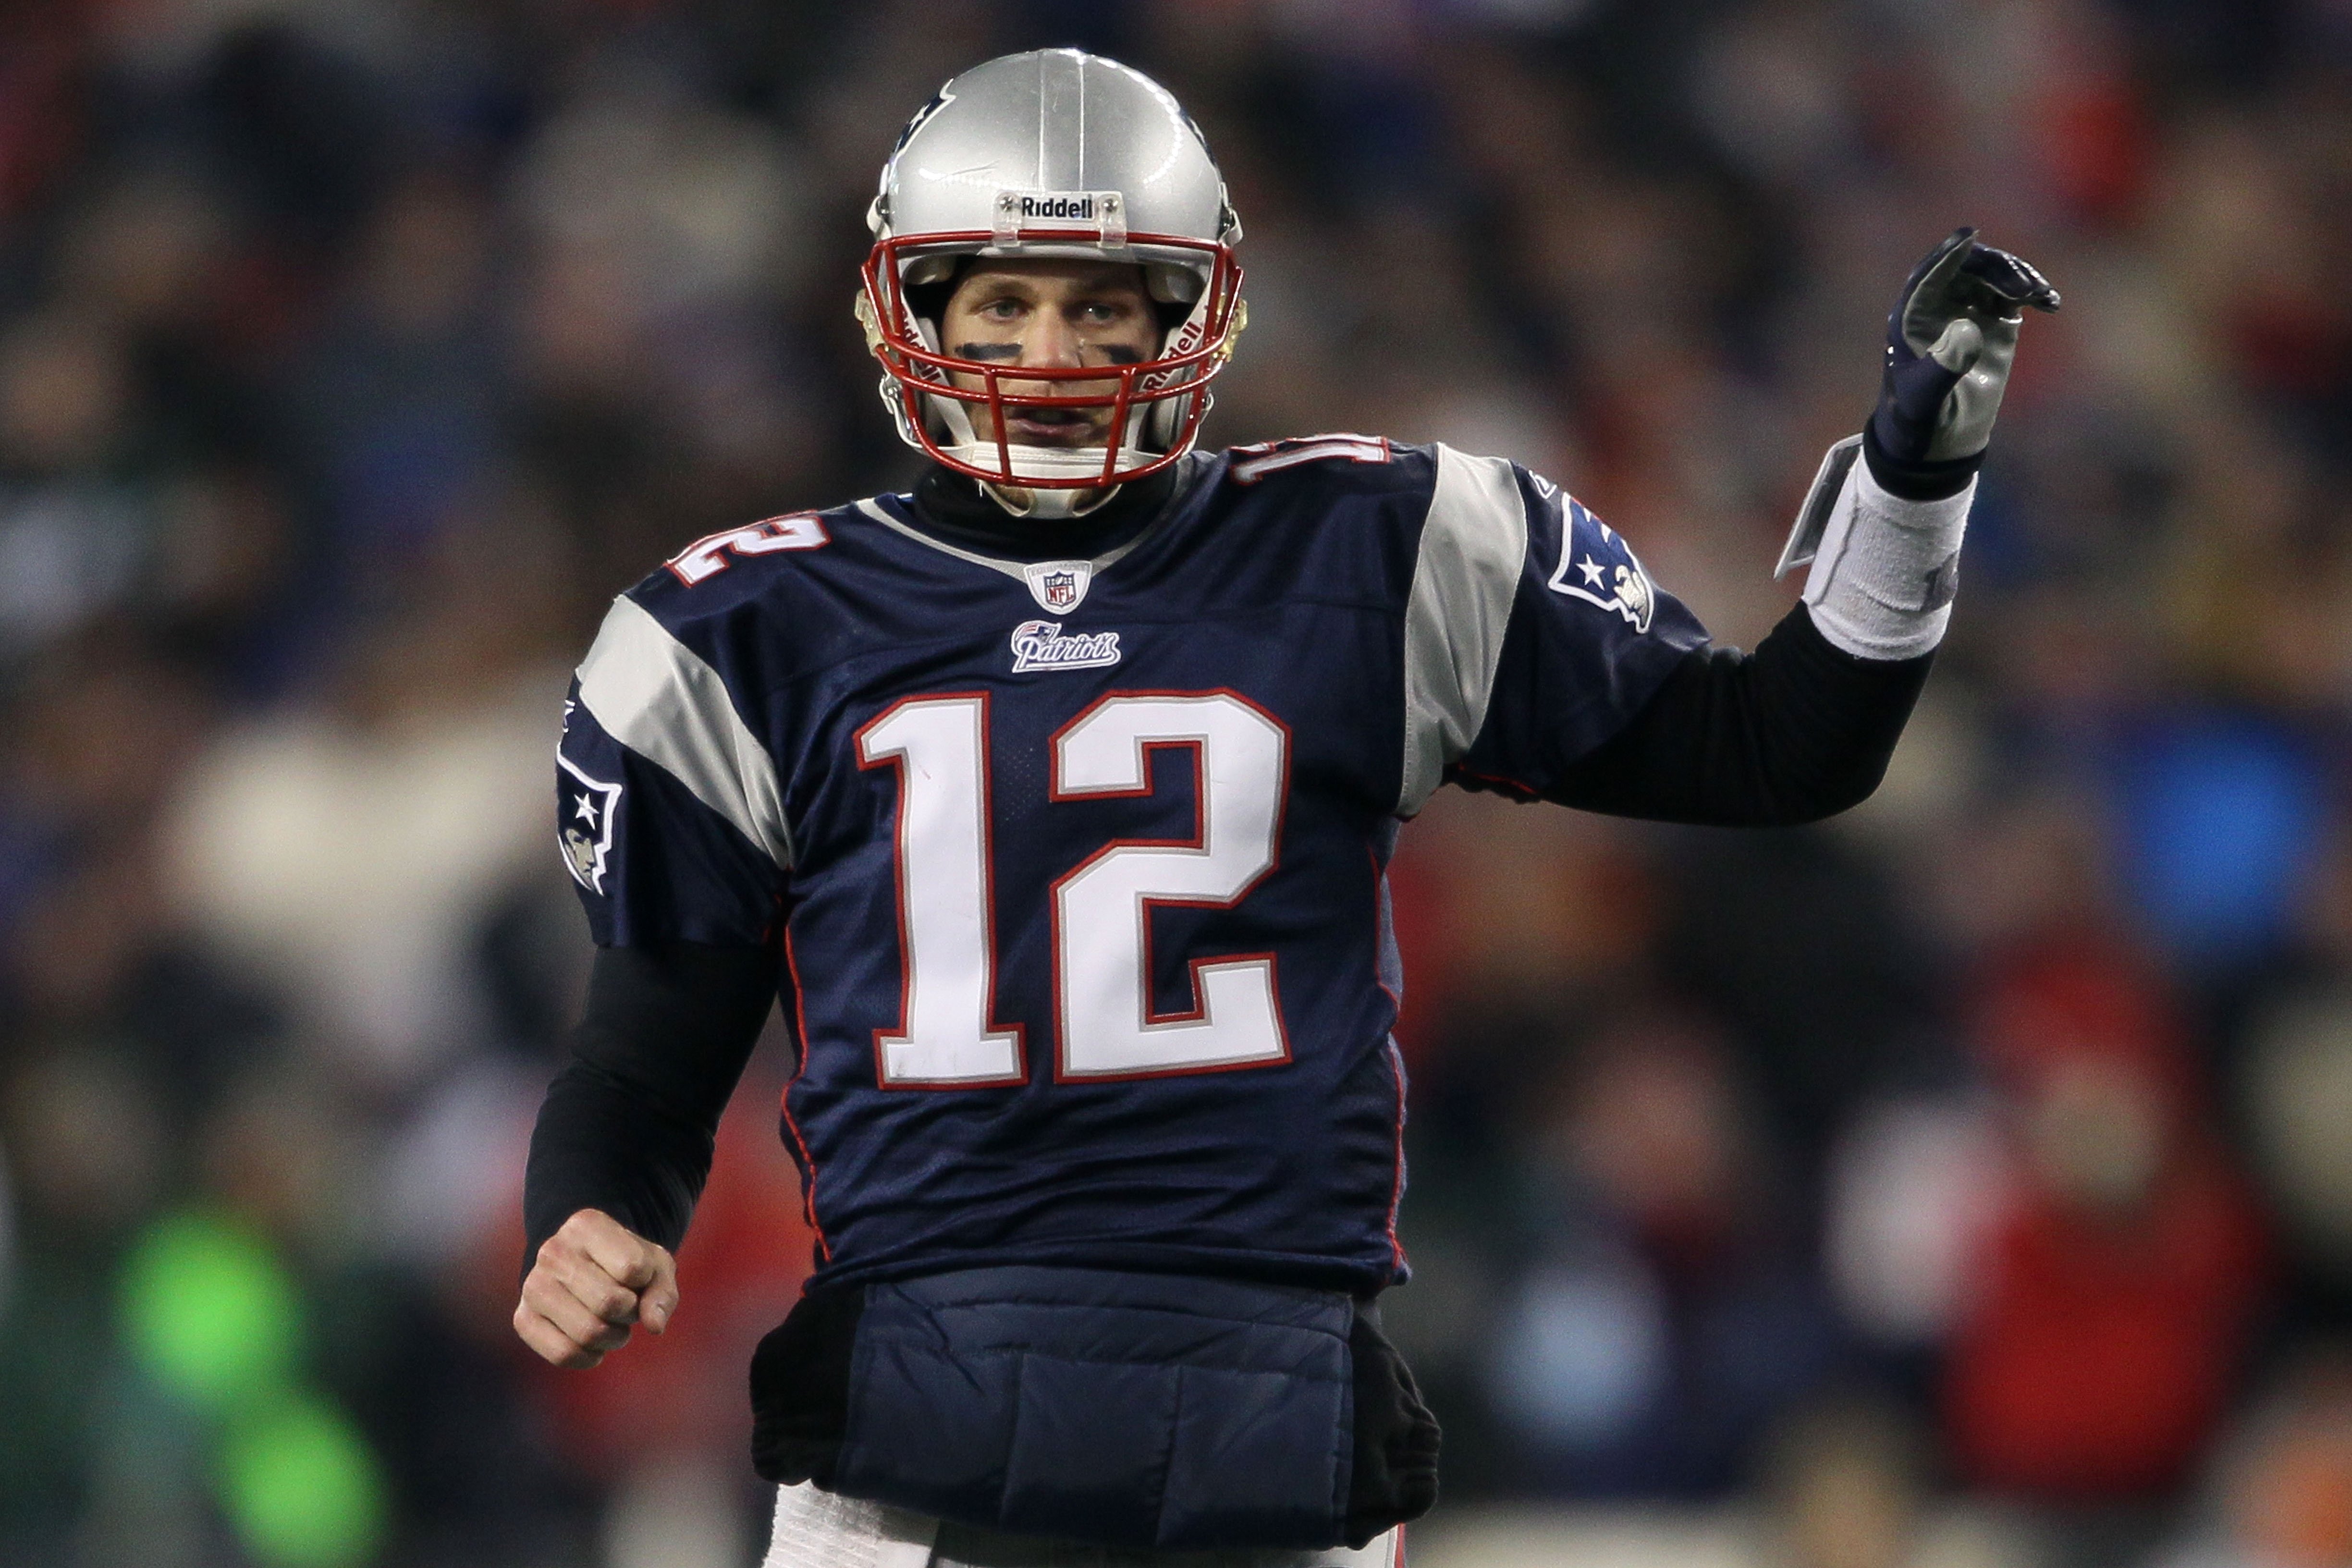 FOXBORO, MA - JANUARY 16:  Quarterback Tom Brady #12 of the New England Patriots signals during their 2011 AFC divisional playoff game against the New York Jets at Gillette Stadium on January 16, 2011 in Foxboro, Massachusetts.  (Photo by Elsa/Getty Image